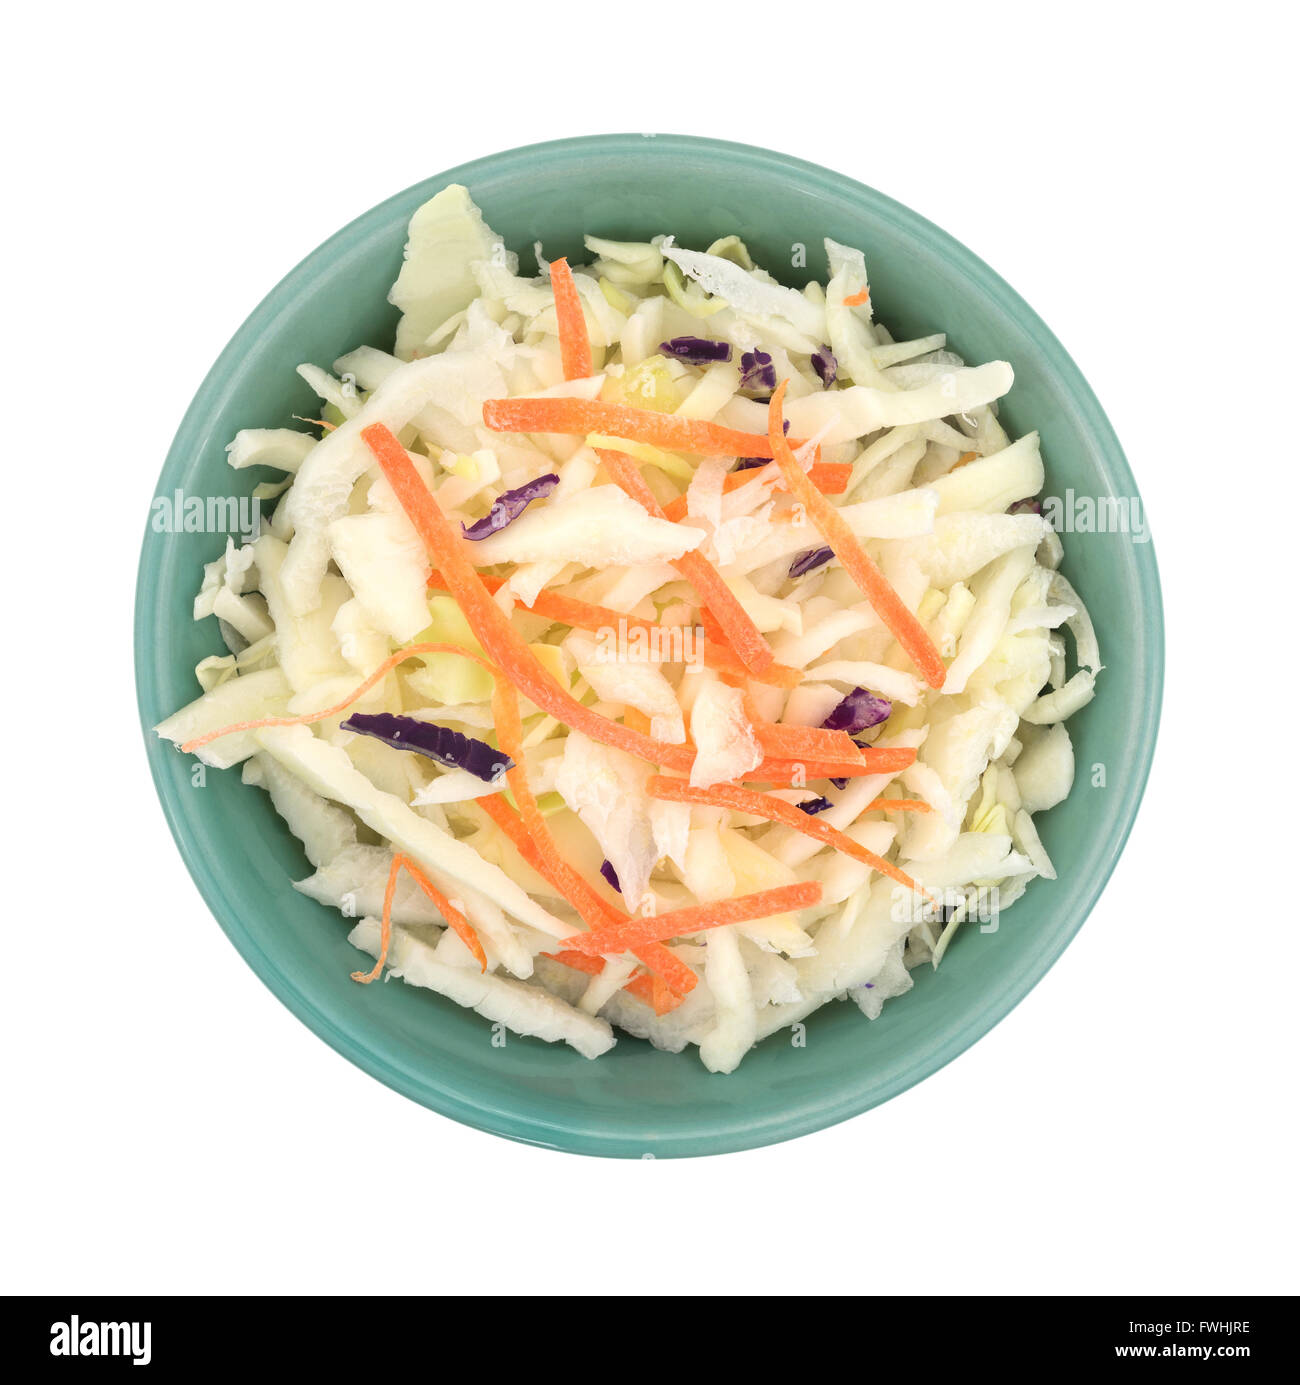 Top view of a bowl filled with coleslaw isolated on a white background. Stock Photo